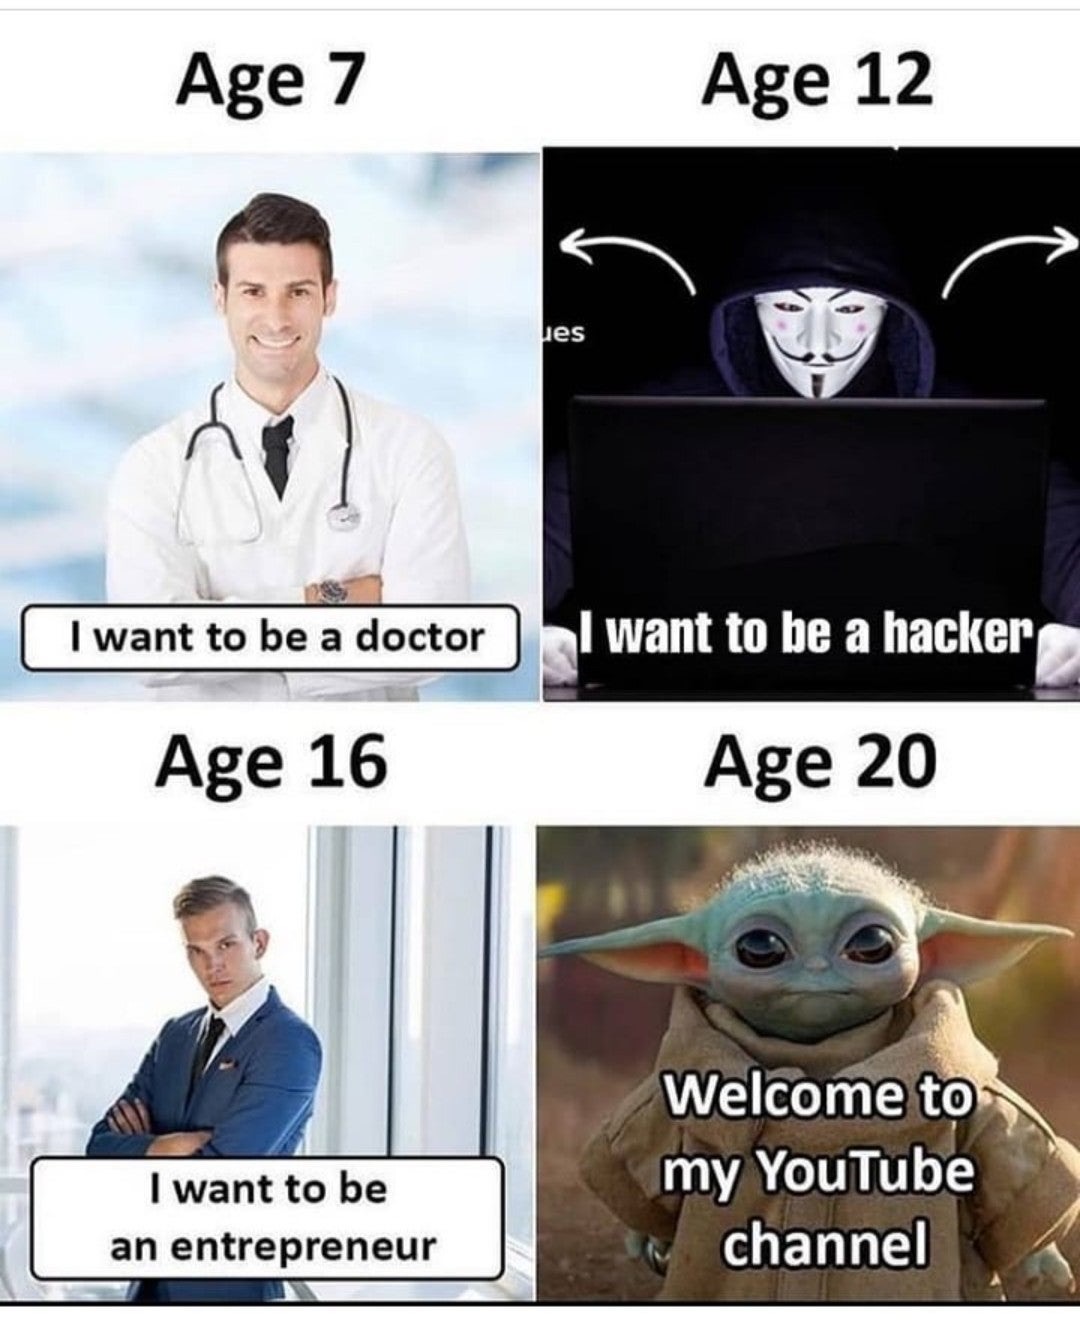 Humour - Age 7 Age 12 ues I want to be a doctor I want to be a hacker Age 16 Age 20 I want to be an entrepreneur Welcome to my YouTube channel